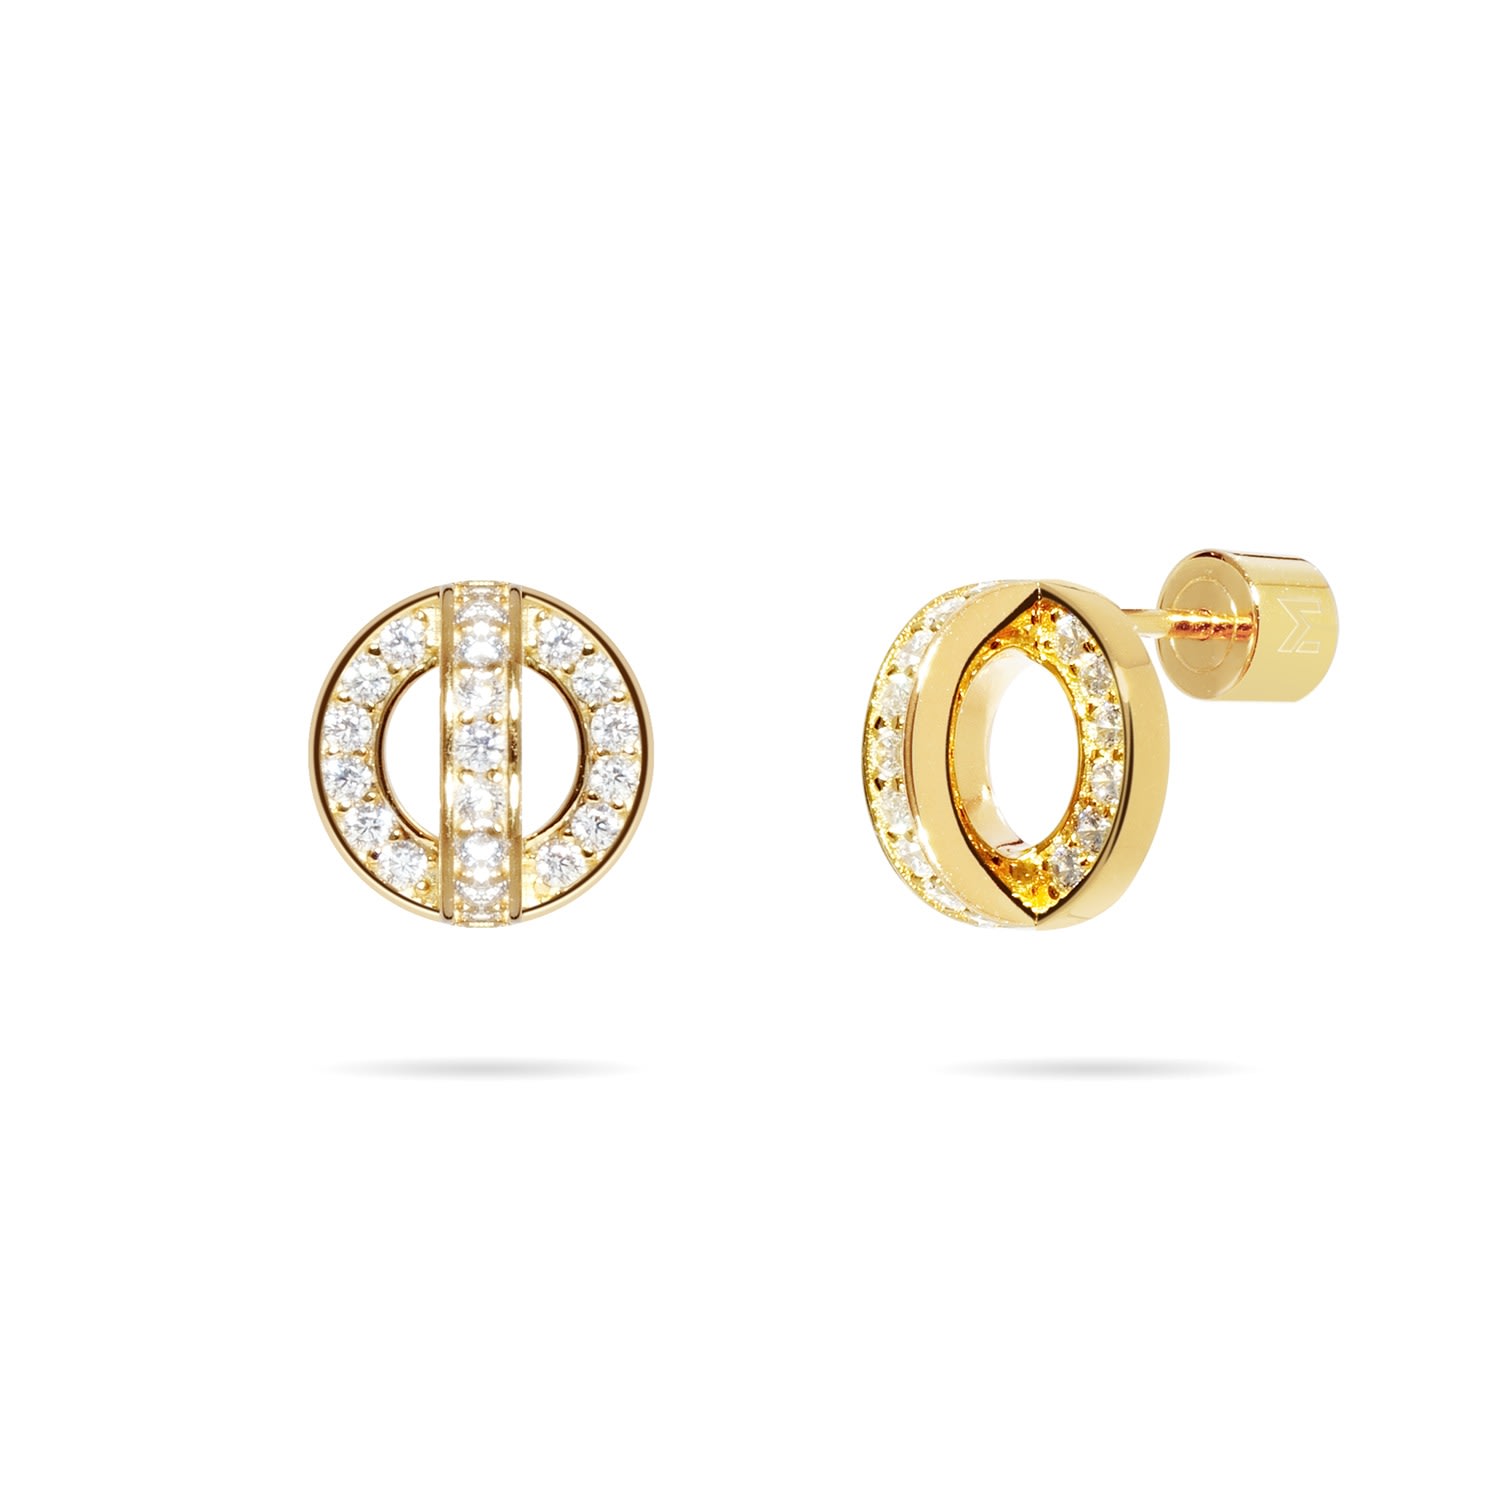 Meulien Women's Circle And Arc Pave Cz Stud Earrings - Gold